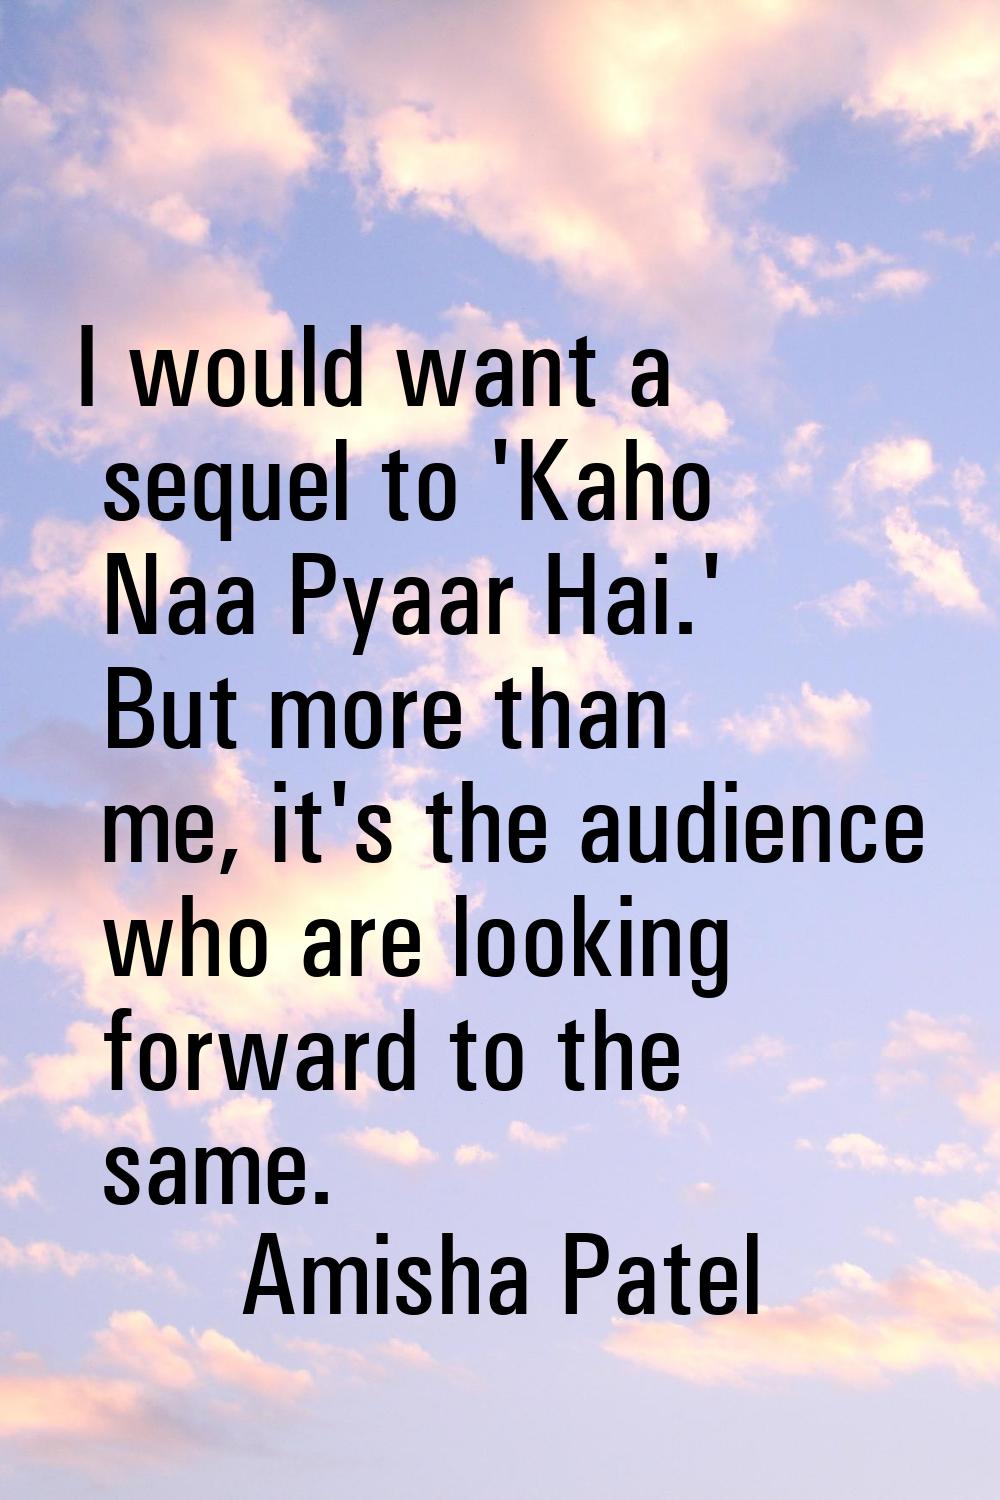 I would want a sequel to 'Kaho Naa Pyaar Hai.' But more than me, it's the audience who are looking 